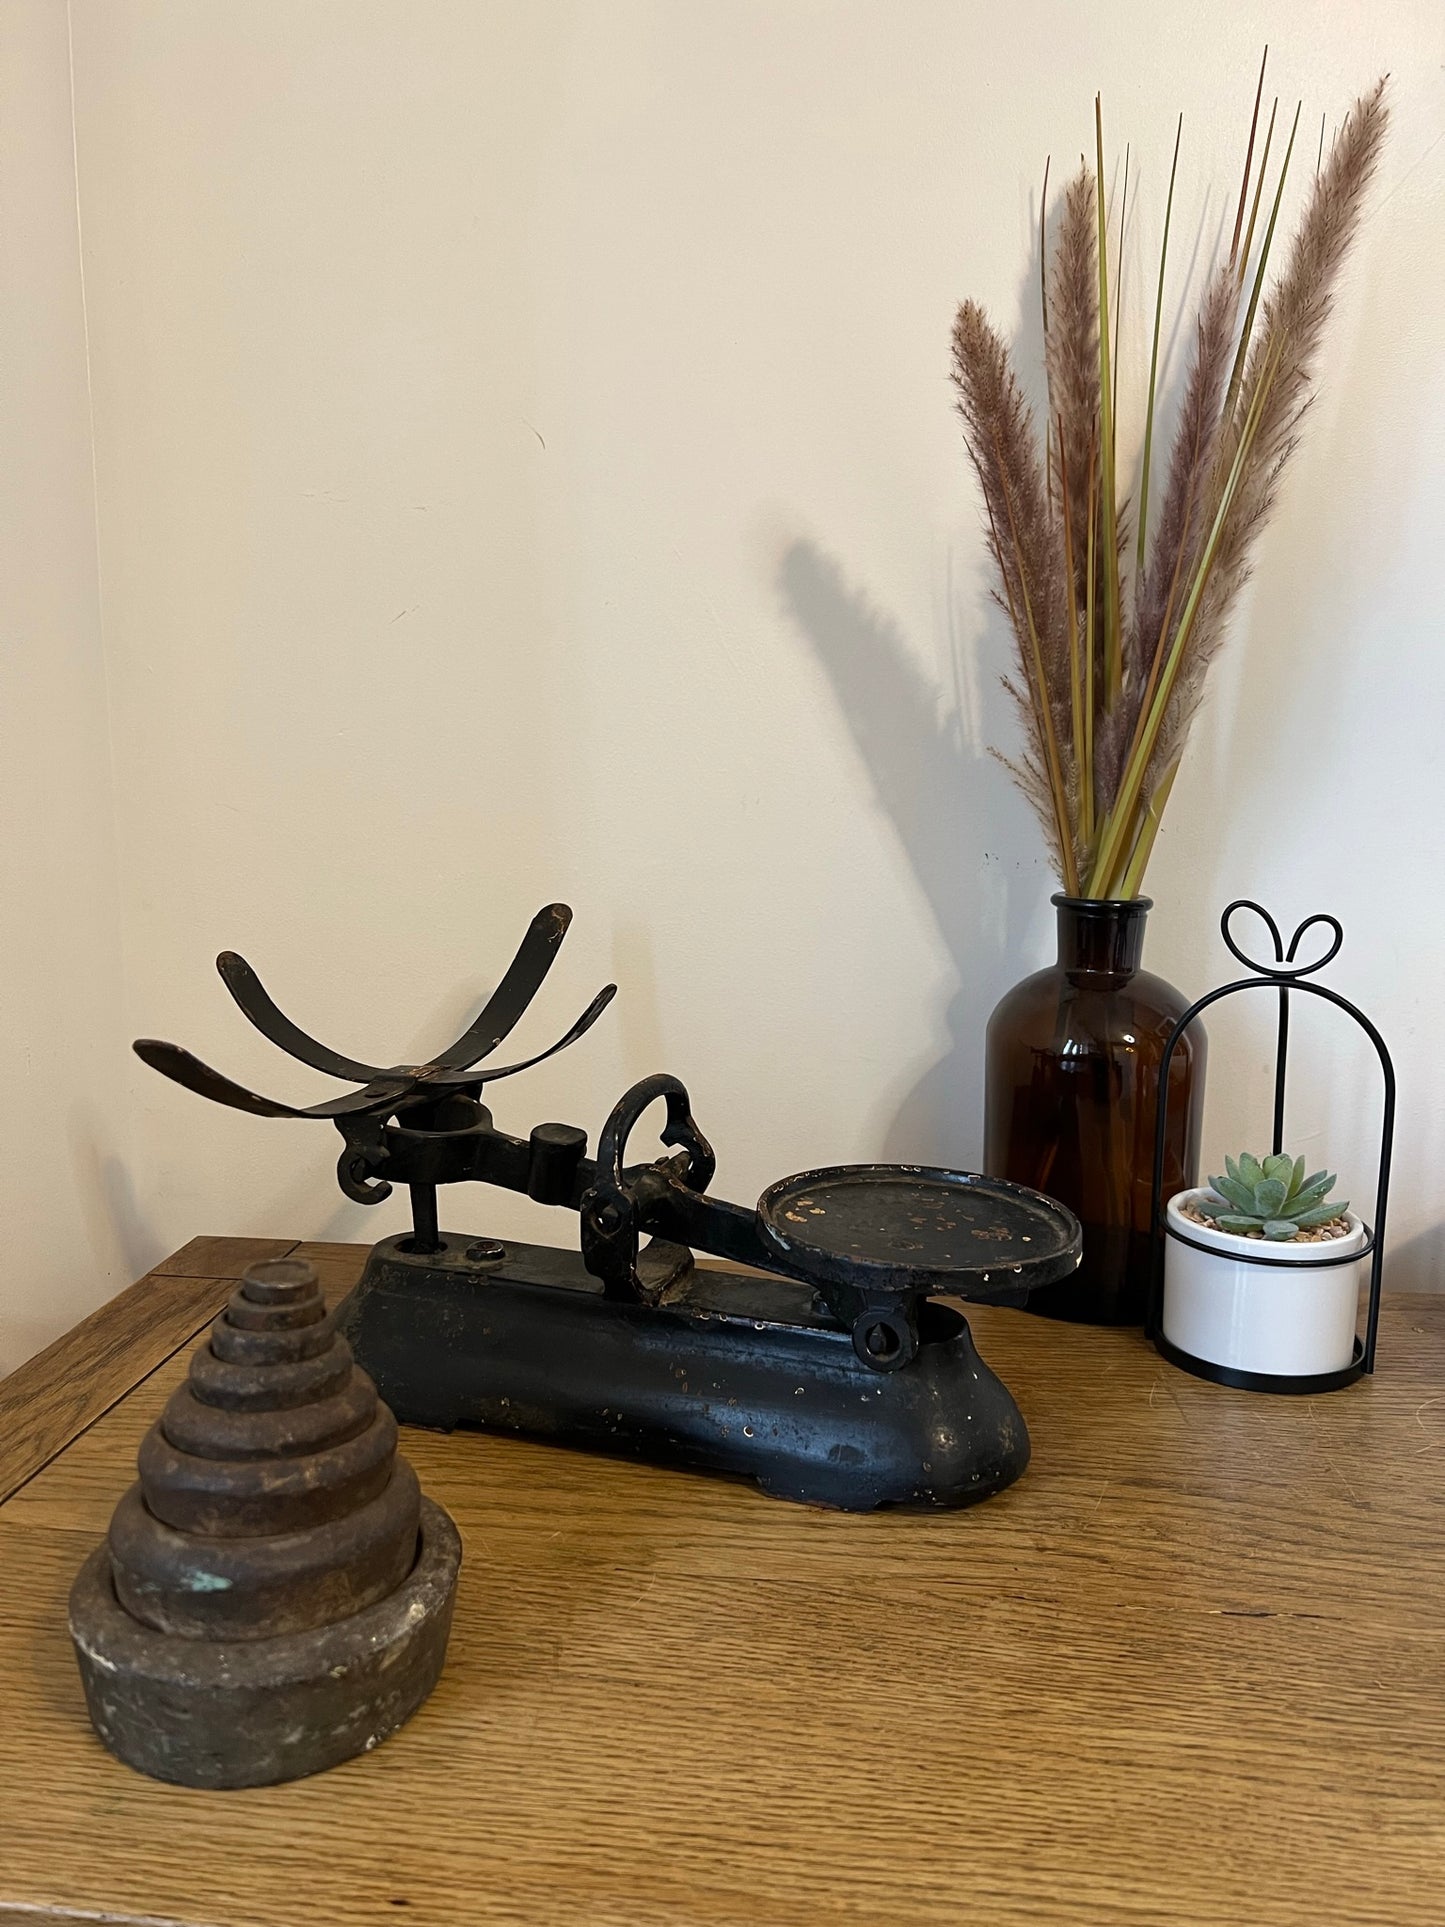 Vintage Cast Iron Weighing Scales Kitchen Grocery or Market Scales Rustic Farmhouse